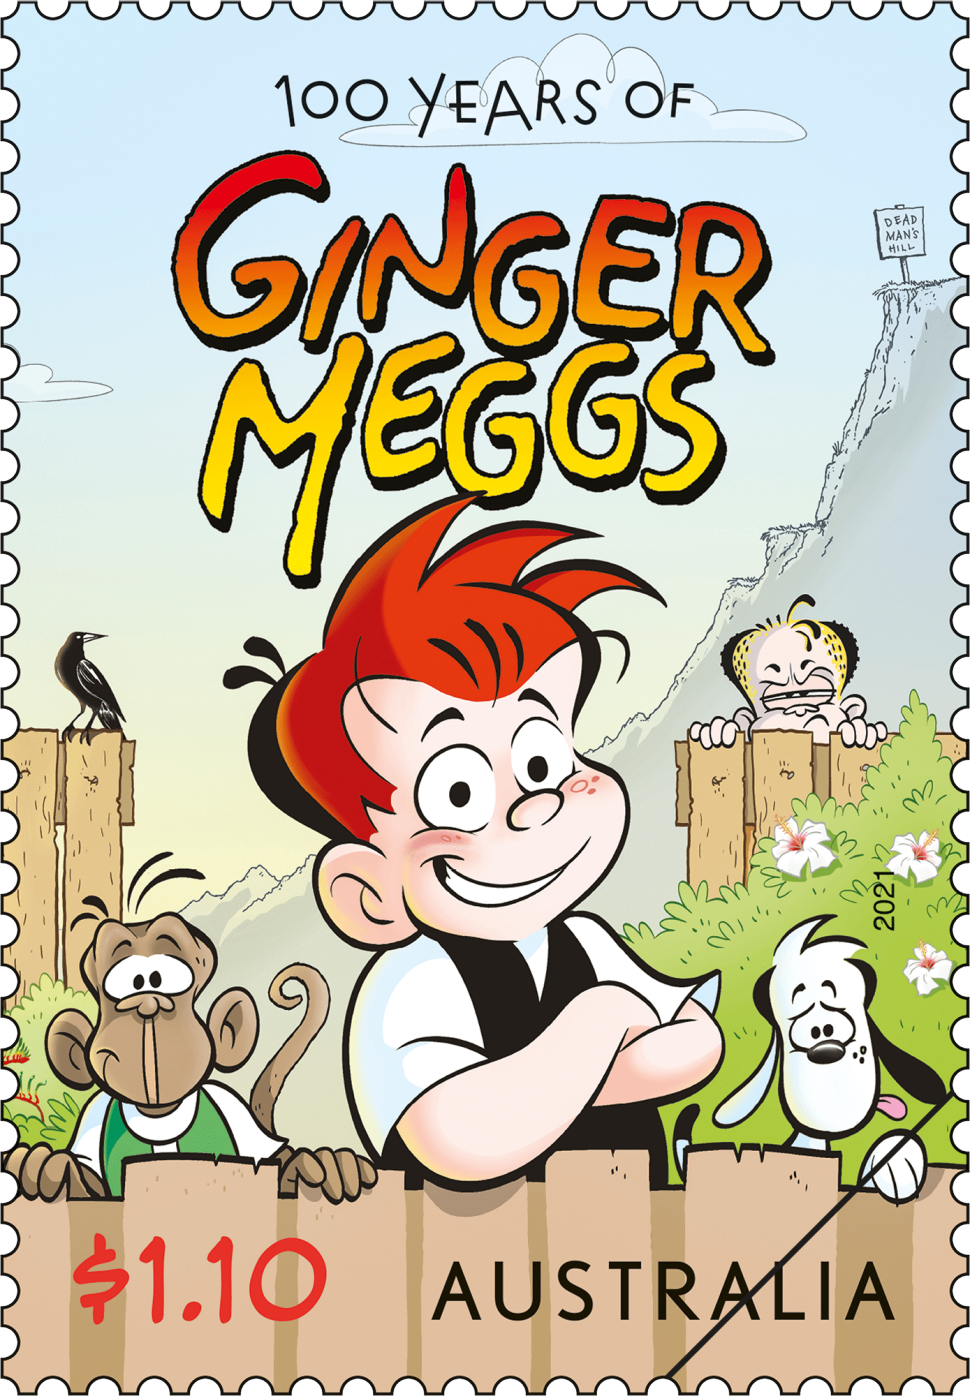 $1.10 Ginger Meggs (at the fence)